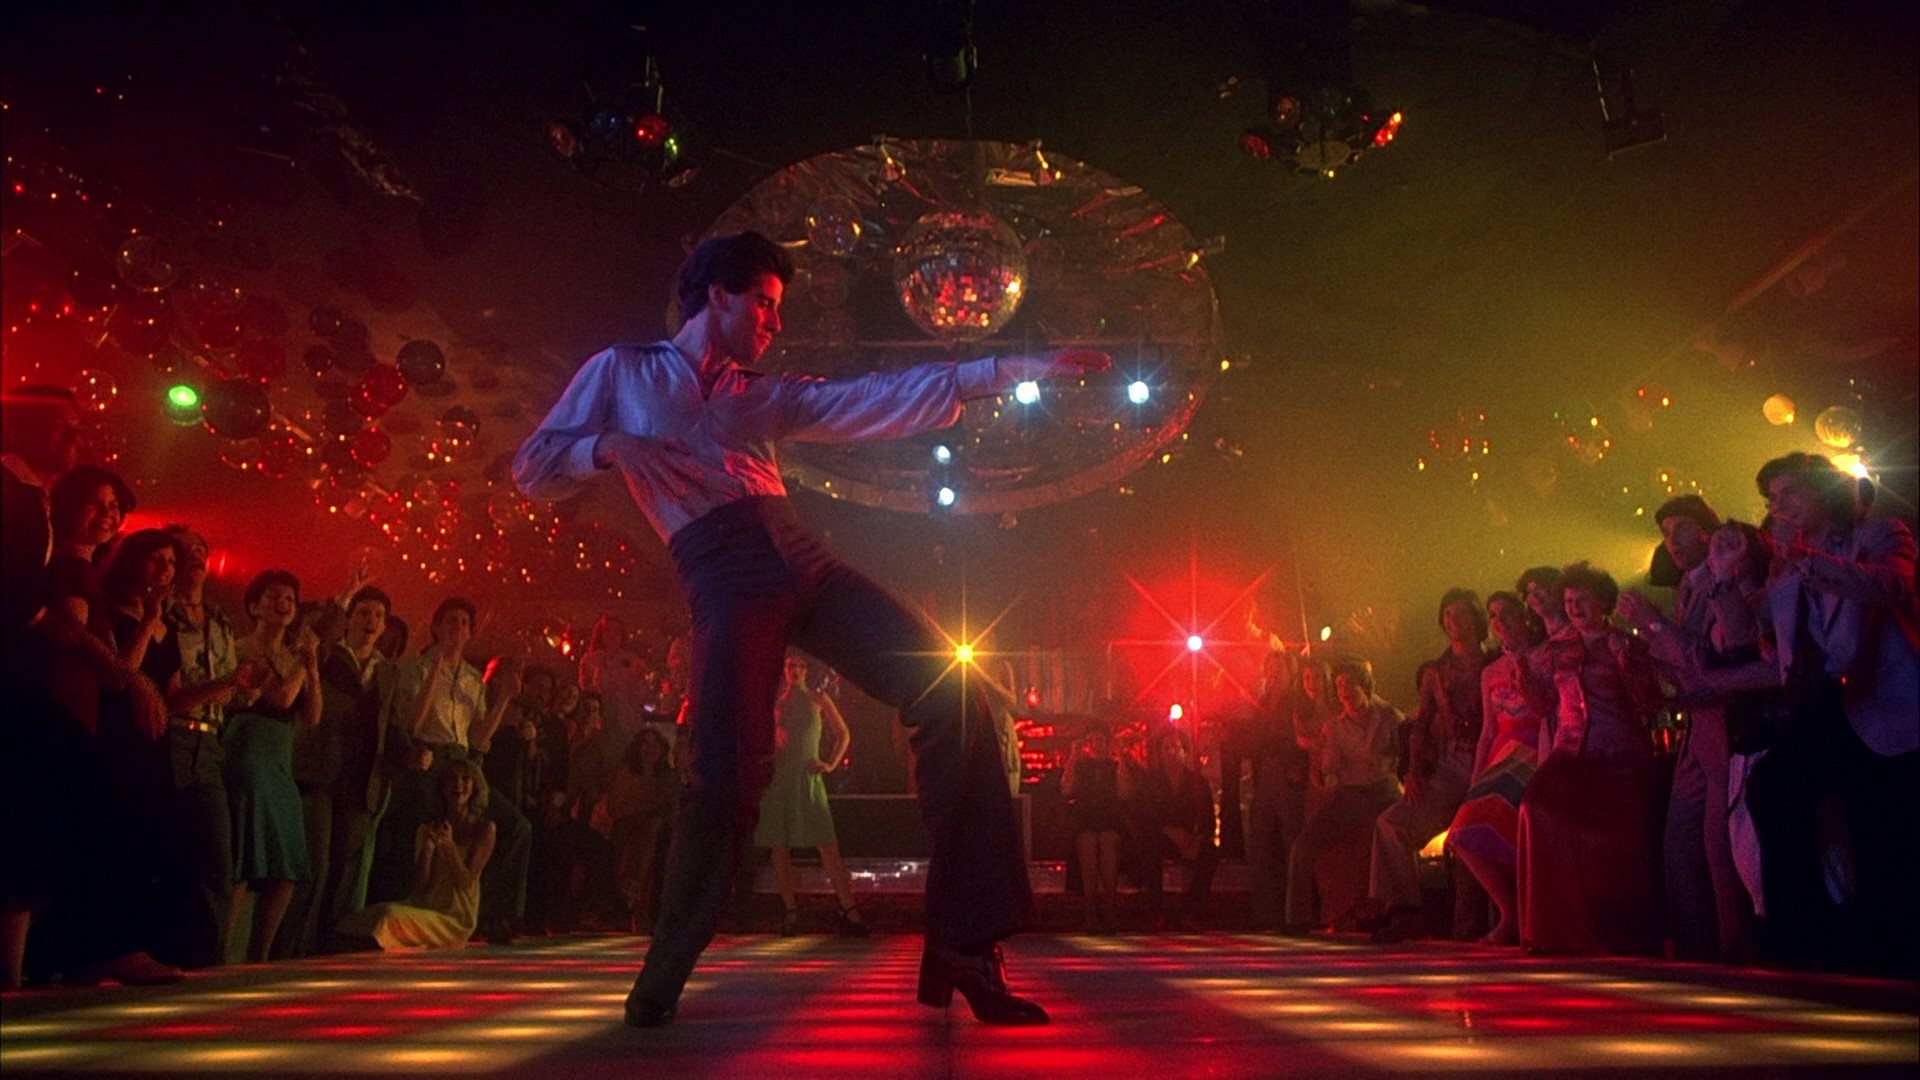 Free download Saturday Night Fever Picture Wallpaper [1920x1080] for your Desktop, Mobile & Tablet. Explore Saturday Night Fever Wallpaper. Saturday Night Fever Wallpaper, Saturday Night Live Wallpaper, Saturday Morning Wallpaper